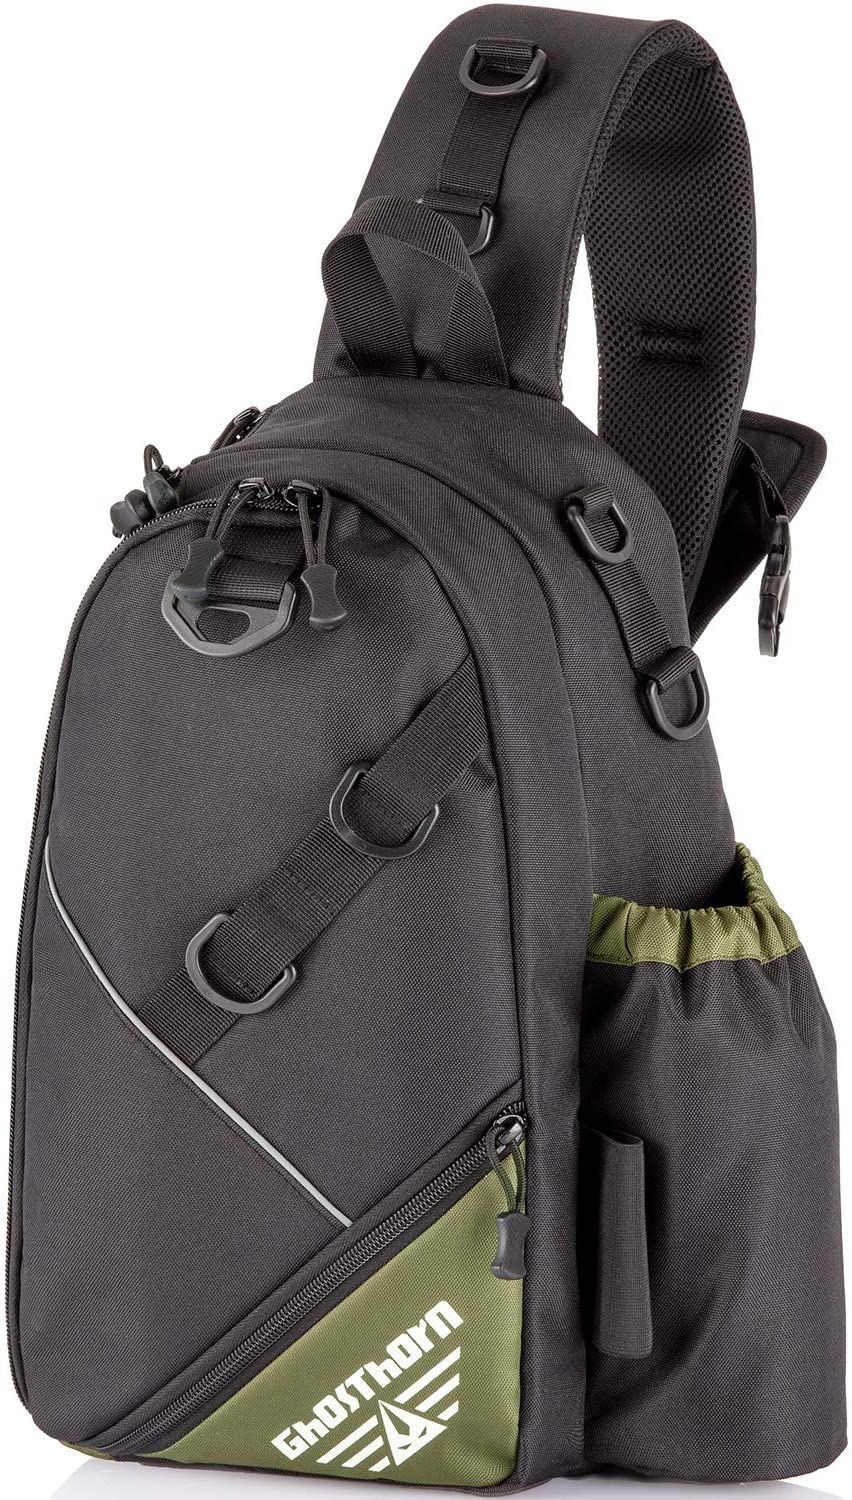 Fishing Backpack with Rod Holder Fishing Tackle Bag Fishing Gear